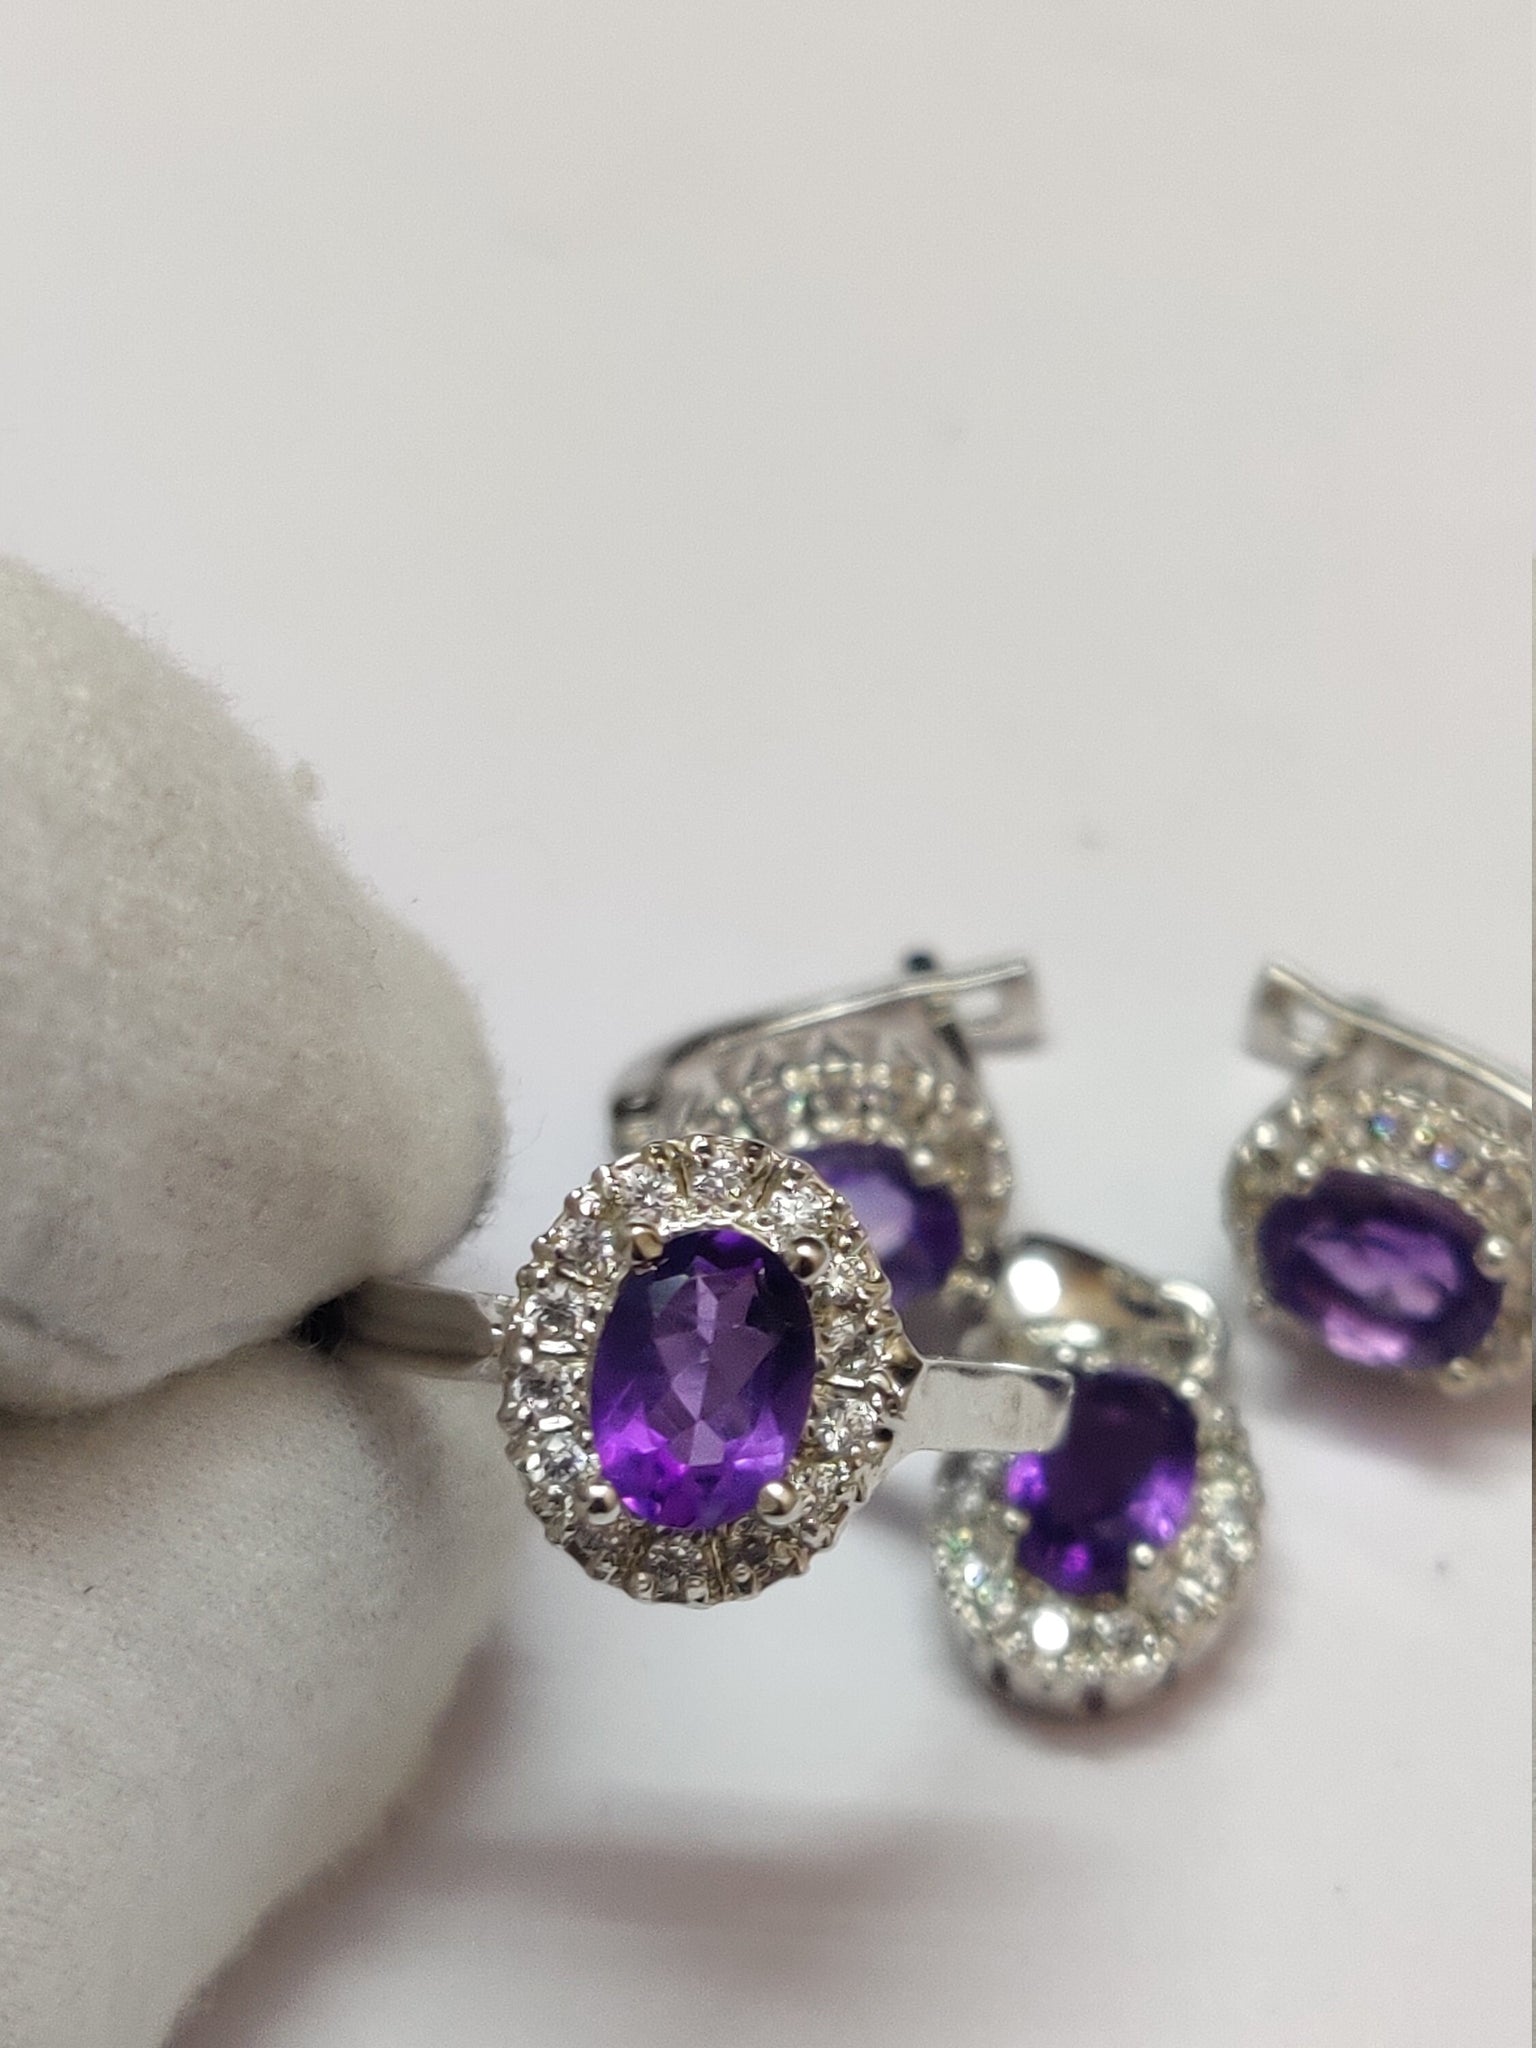 Silver Amethyst Jewelry Set Amethyst Cluster Jewelry Set 3.2 Ct Natural Amethyst 5x7 mm Oval February Birthstone Set Jewelry Set For Women